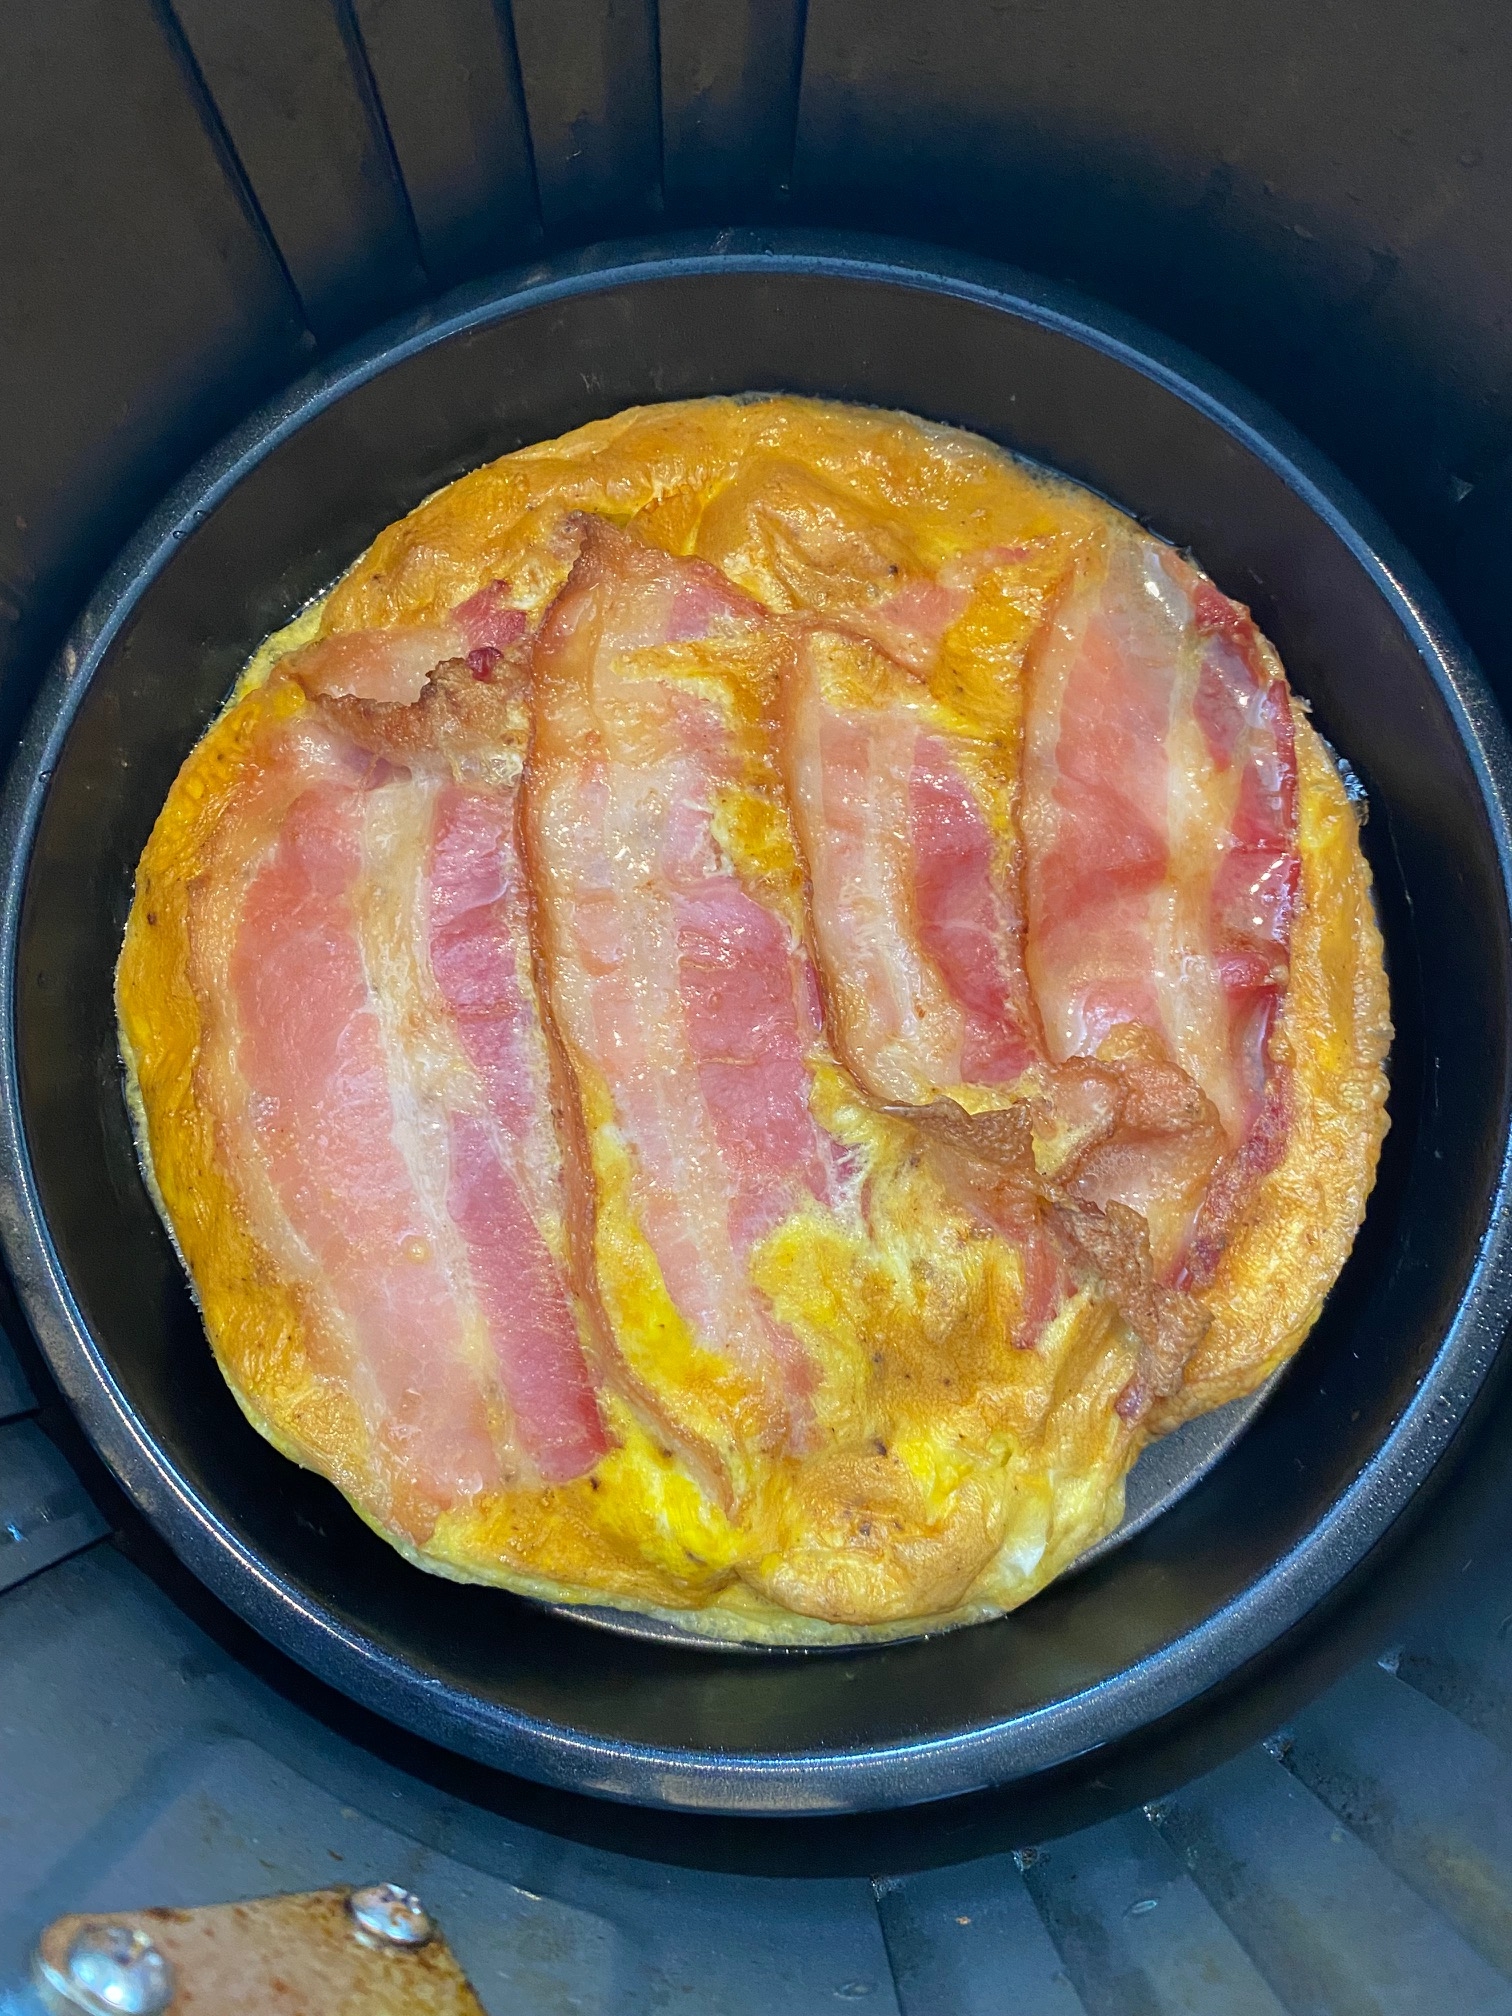 Cooked bacon and eggs in the air fryer basket.